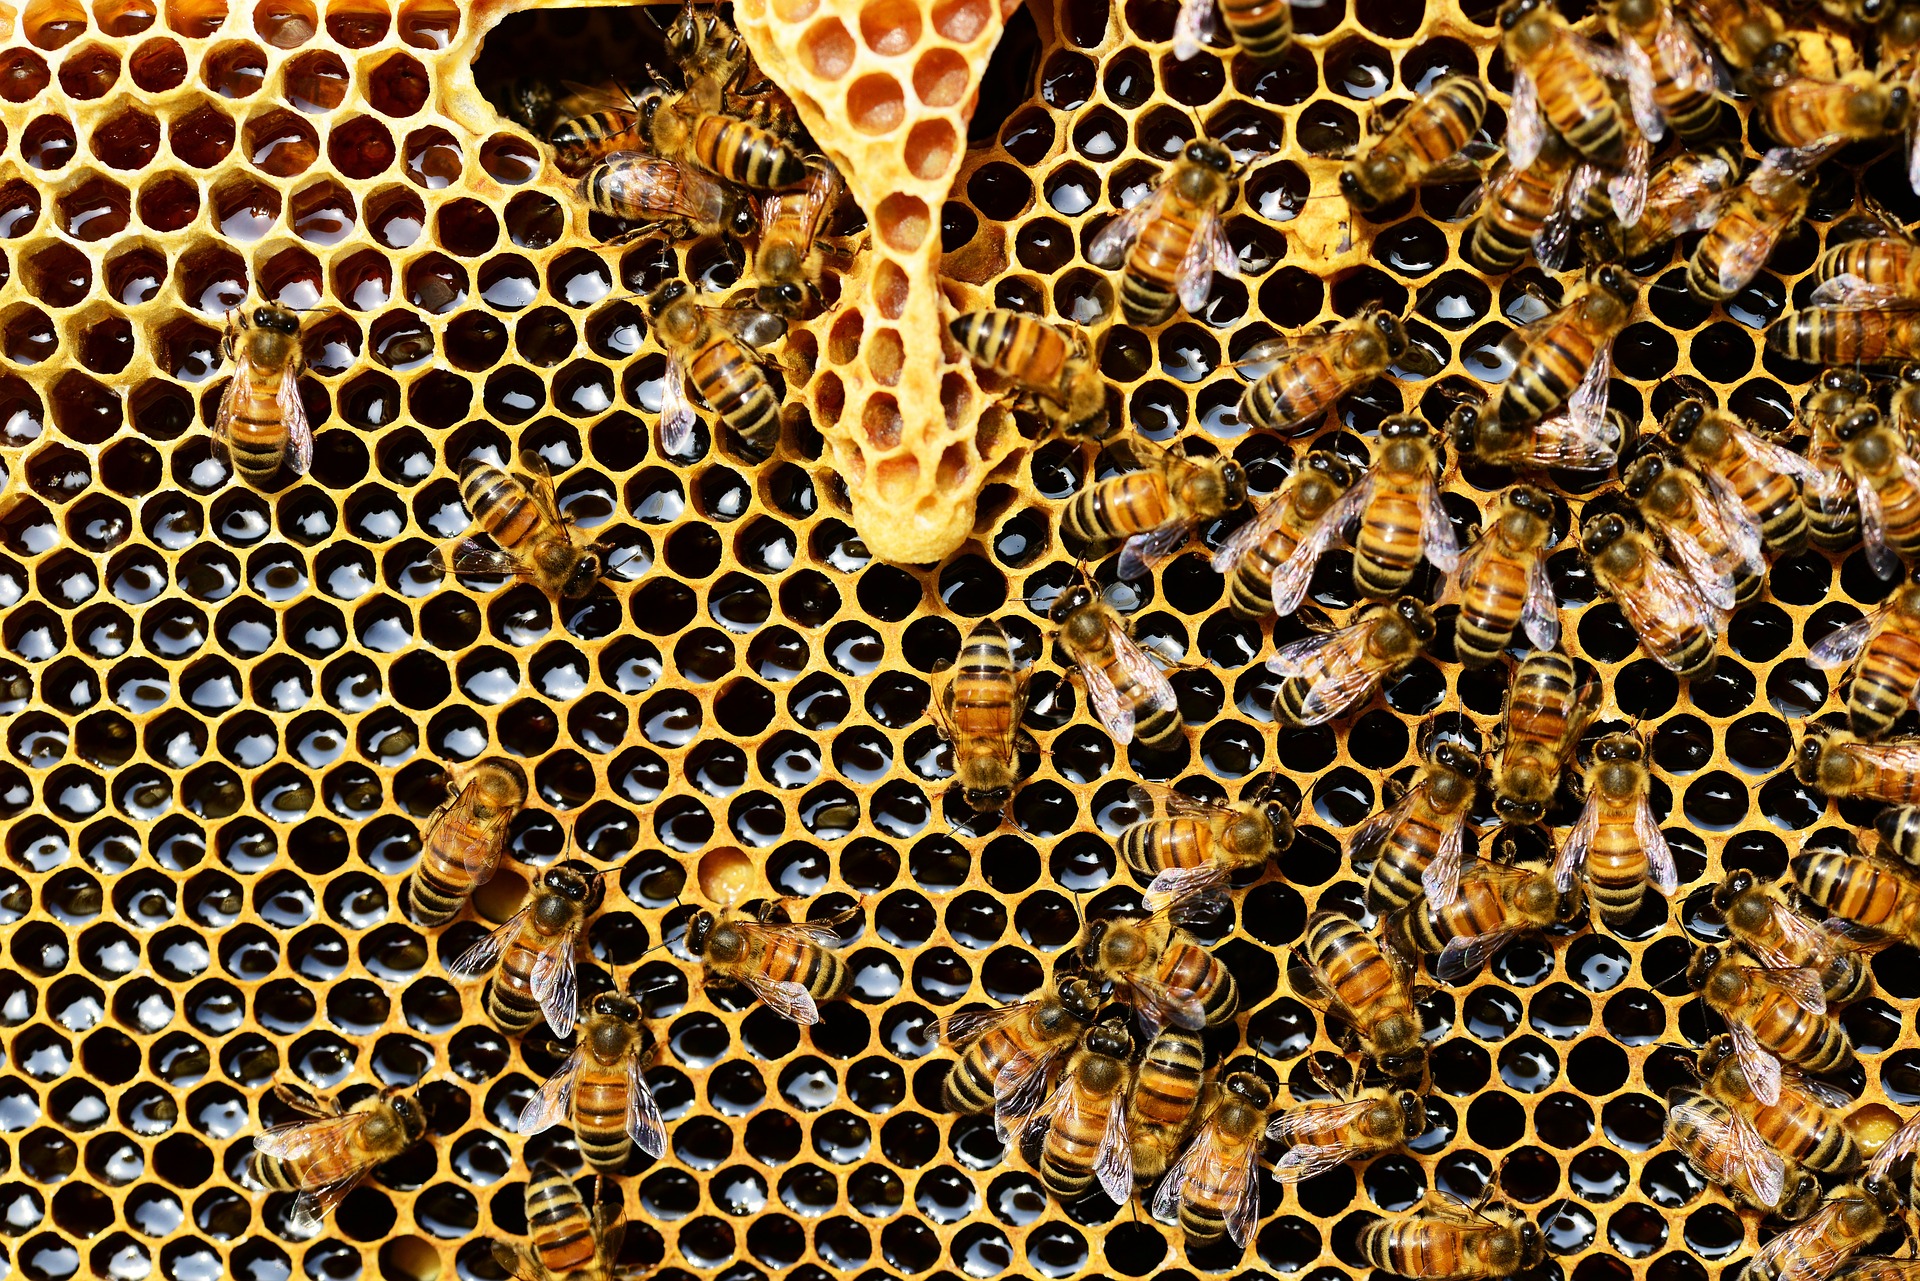 Honey bees in a hive